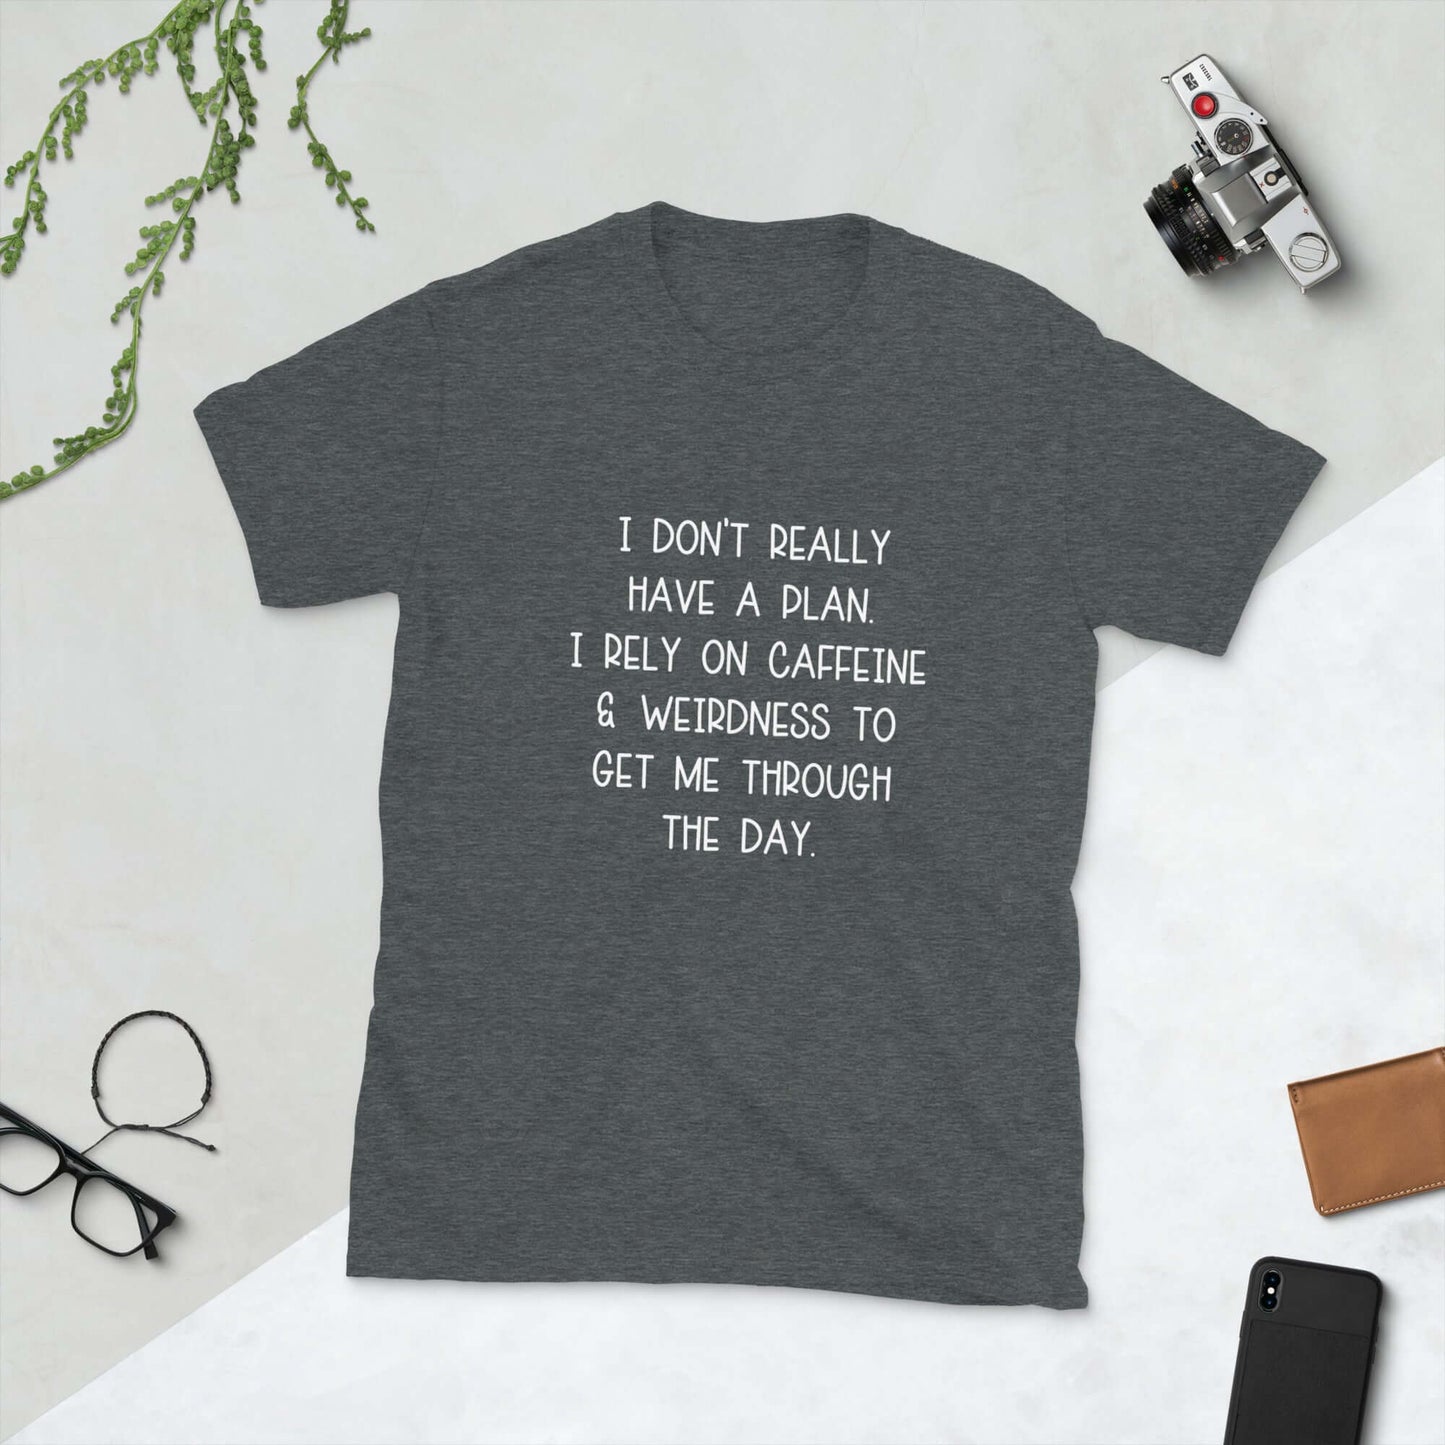 Dark grey t-shirt with the words I don't really have a plan. I rely on caffeine & weirdness to get me through the day printed on the front.